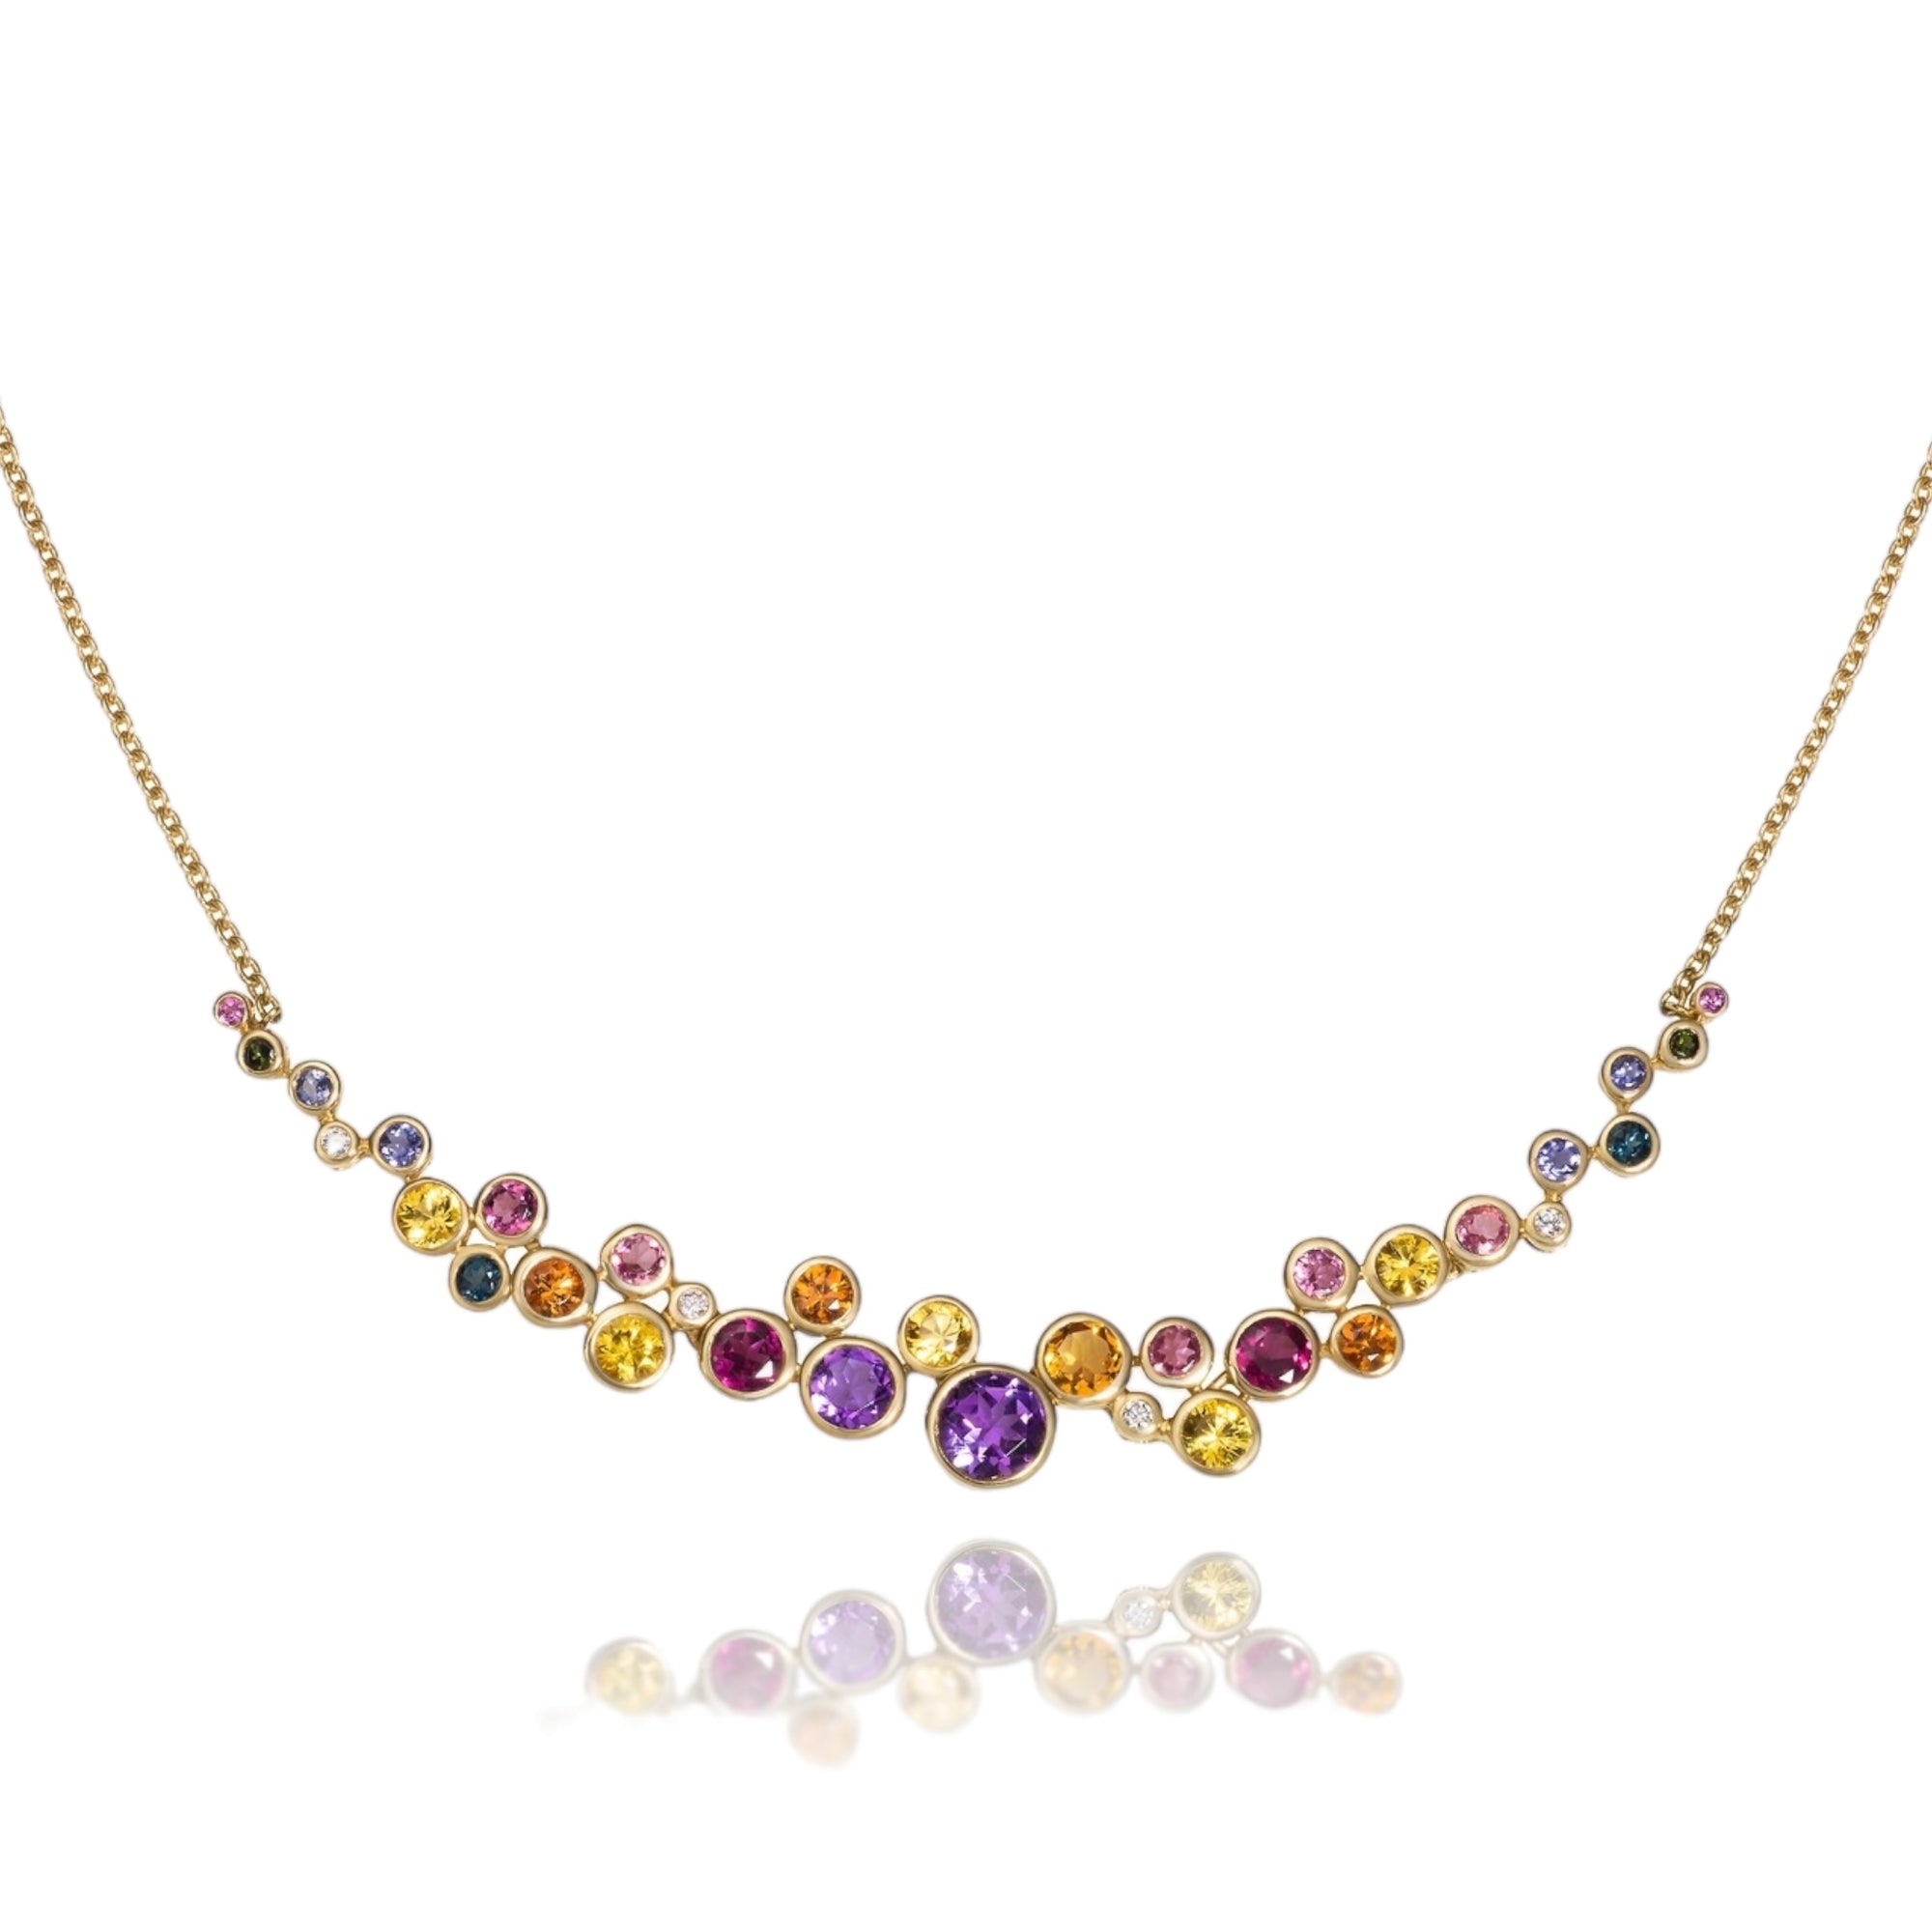 Multi-color Constellation Necklace by Martha Seely available at Talisman Collection Fine Jewelers in El Dorado Hills, CA and online. Stats: The Constellation Necklace is a joyous exploration of color with a mix of 6.6 cts of amethysts, citrines, tourmalines, sapphires and 0.042 cts of diamonds it will surely dazzle. The cluster is suspended from a delicate 18” cable chain with a lobster clasp. 